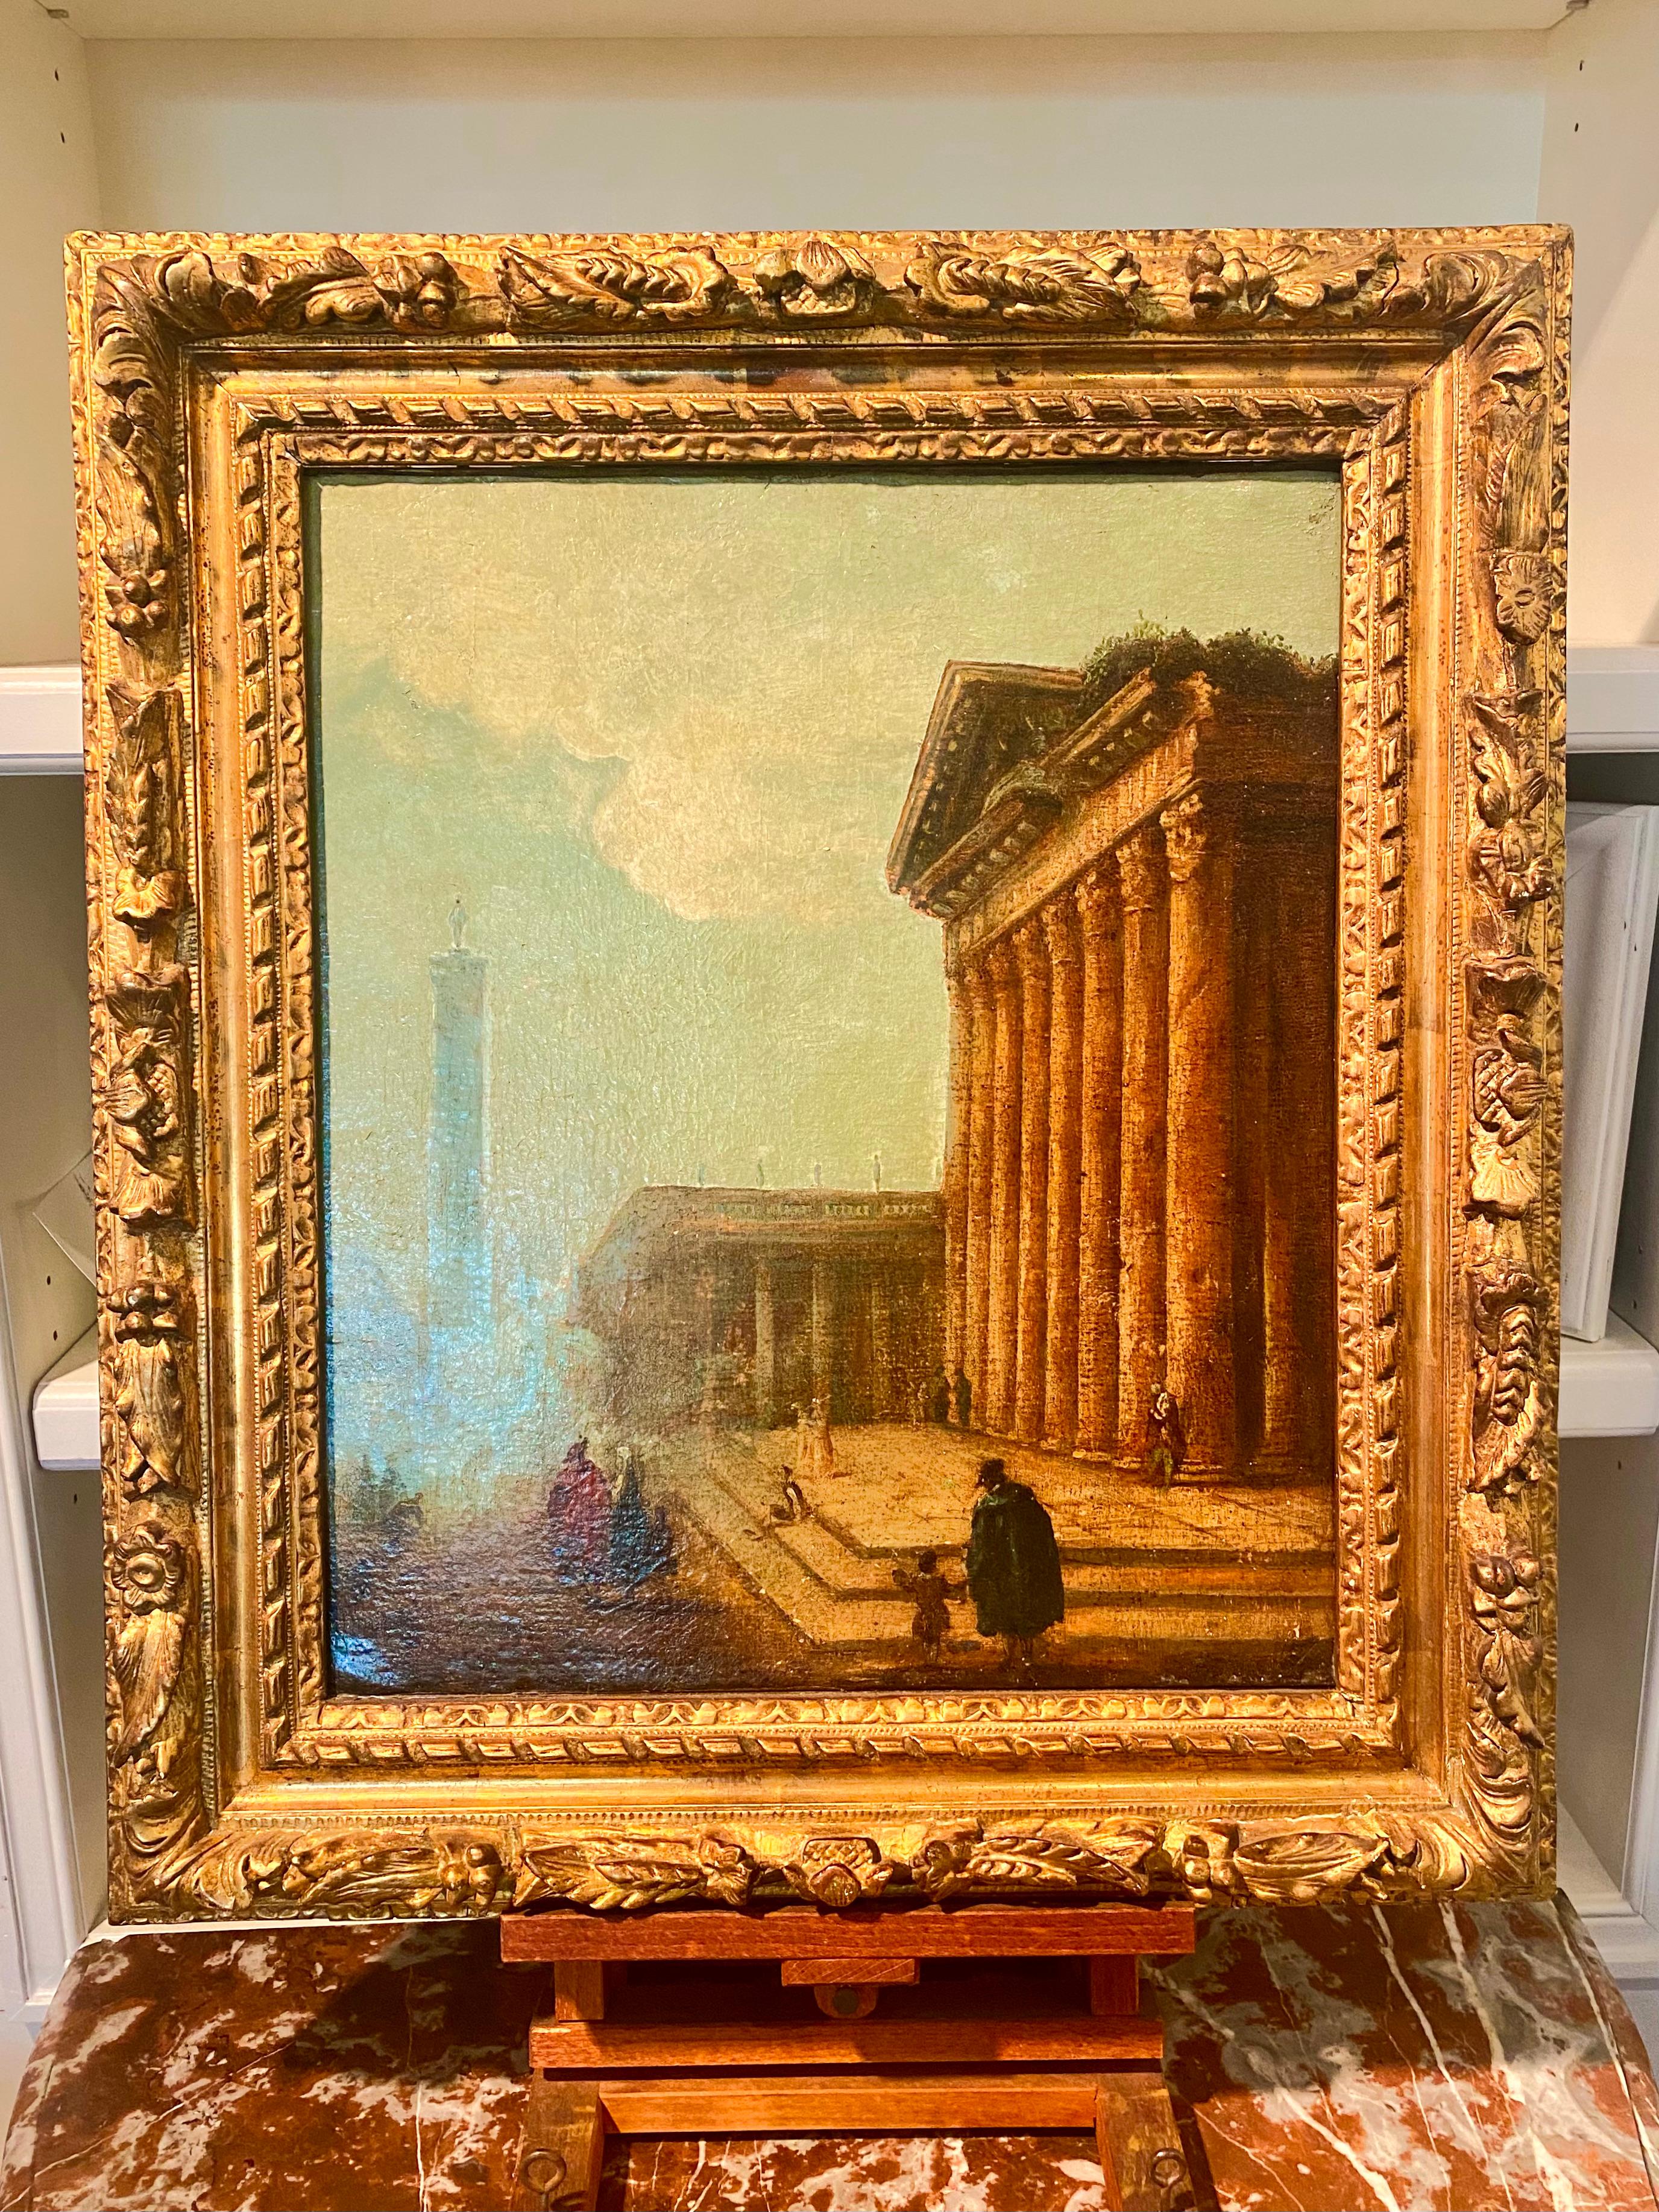 French neoclassical Architectural landscape, oil on canvas

In the manner of the Grand Tour, exceptionnal, glowing painting. 

Beautiful size, scale and quality of the subject and of the painting. 

The subjects' clothing and demeanor hint of